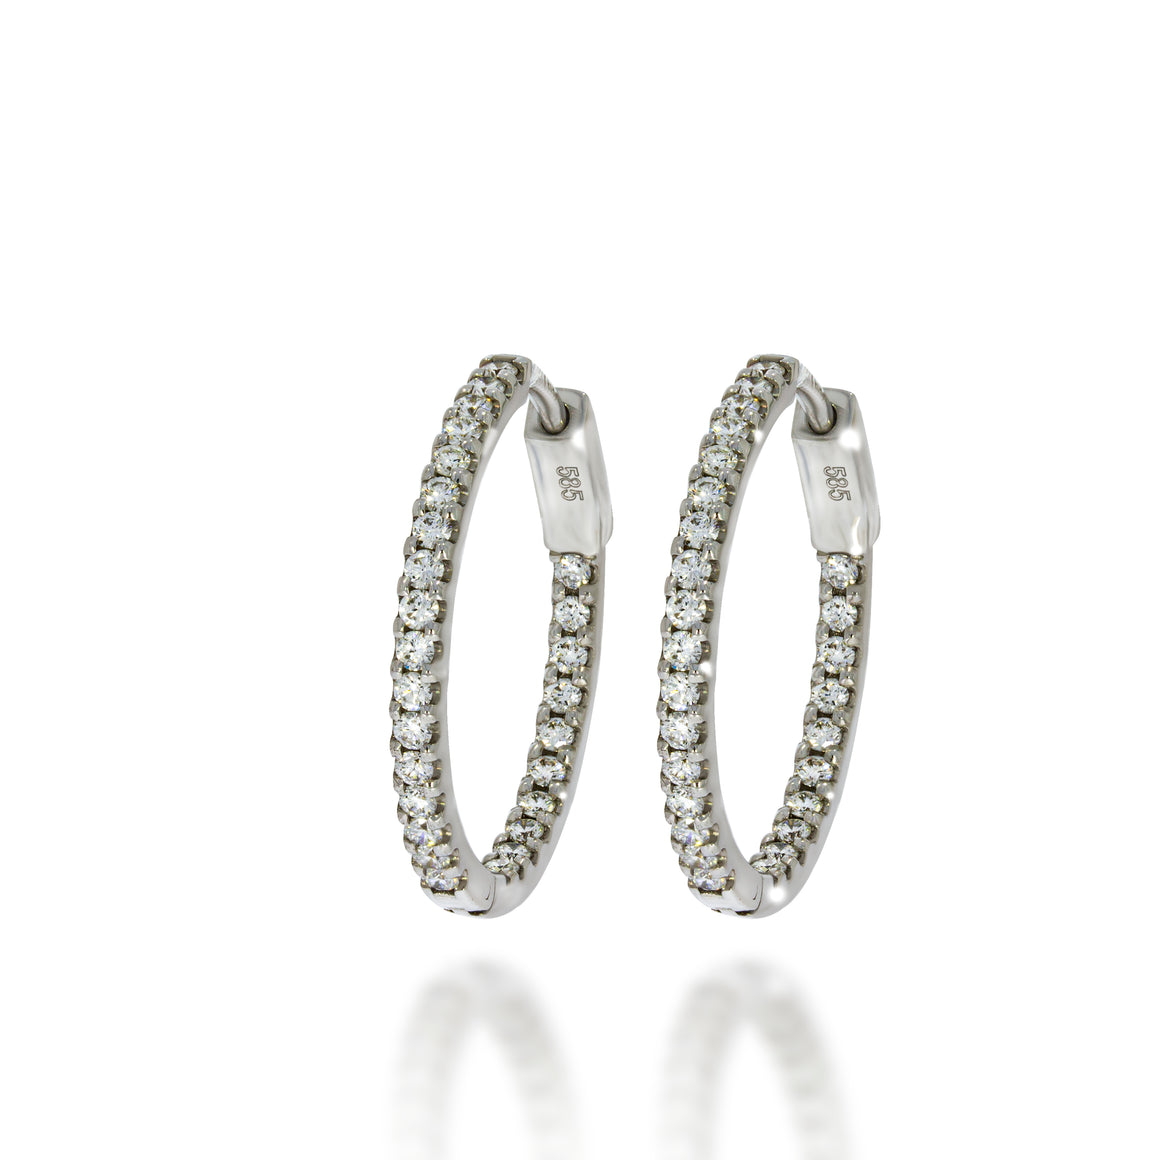 Impressive, powerful and unique appearance hoop earrings 14k white gold, set all around with 0.8ct drawing admiration from all angles.